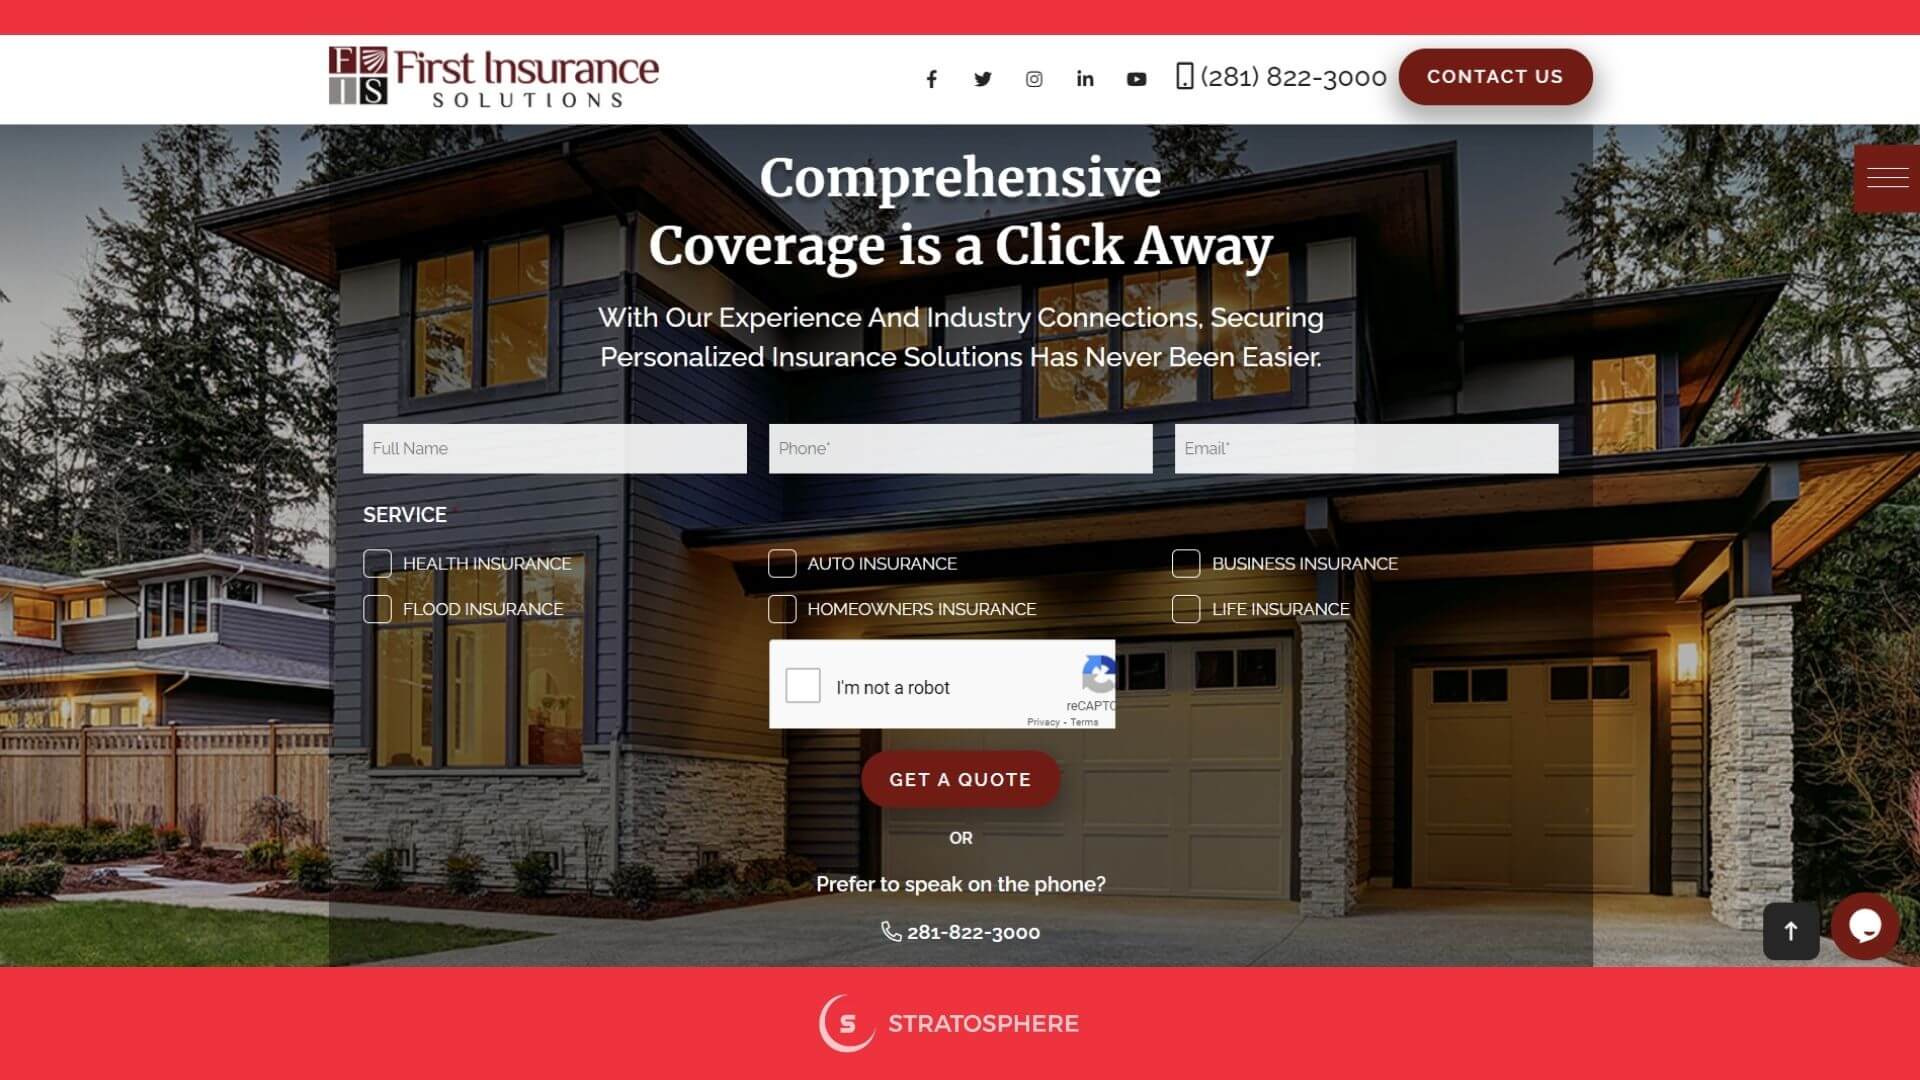 First Insurance website showing forms with limited fields and quick filling options